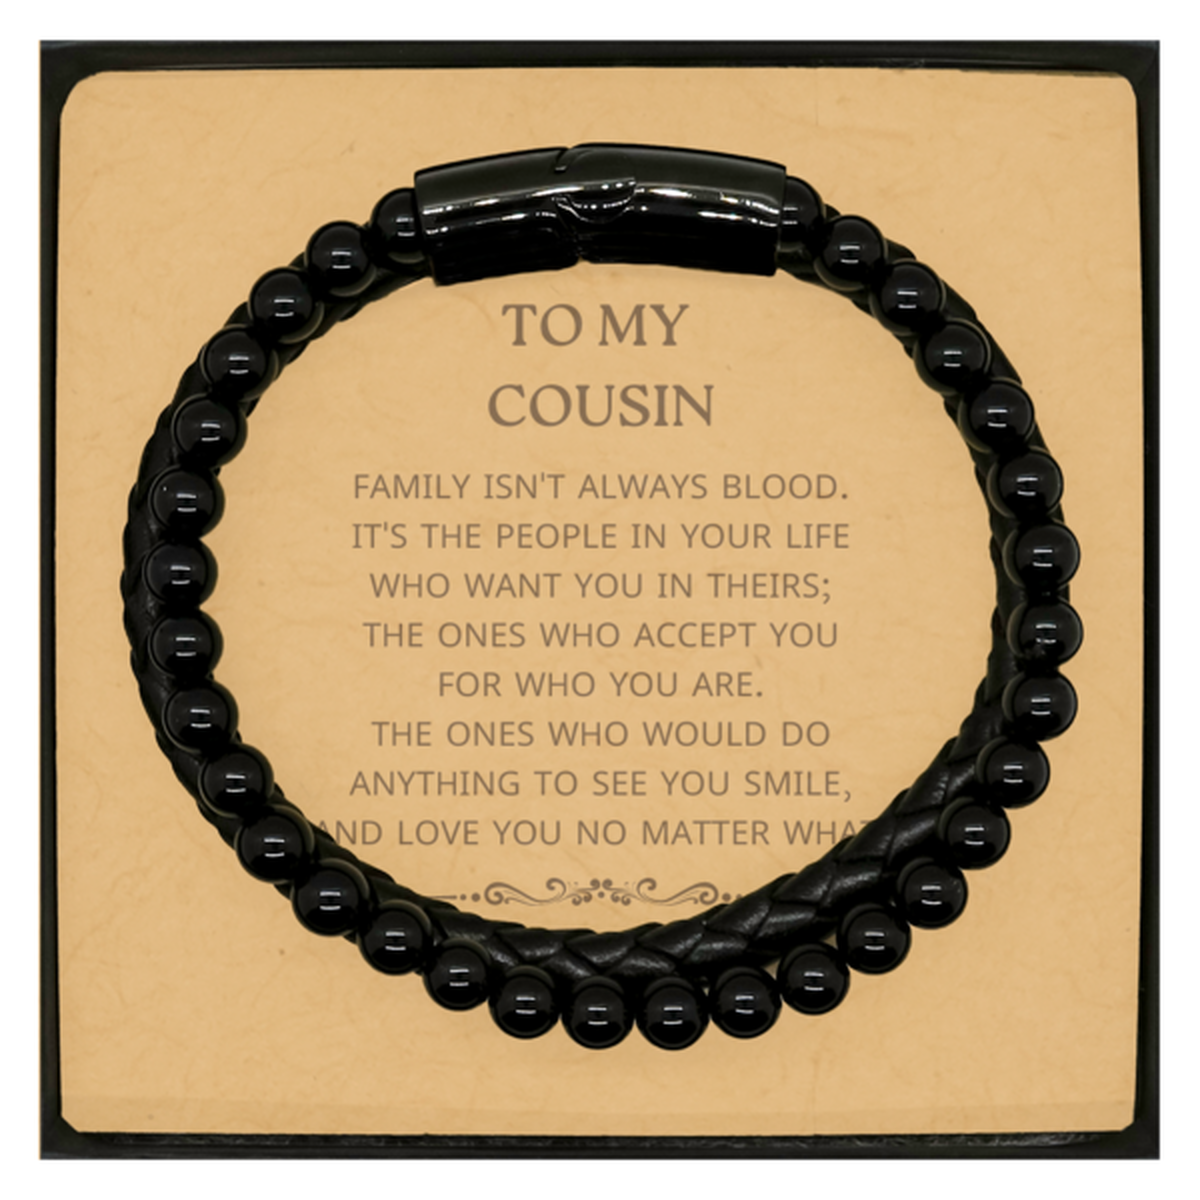 To My Cousin Gifts, Family isn't always blood, Cousin Stone Leather Bracelets, Birthday Christmas Unique Present For Cousin